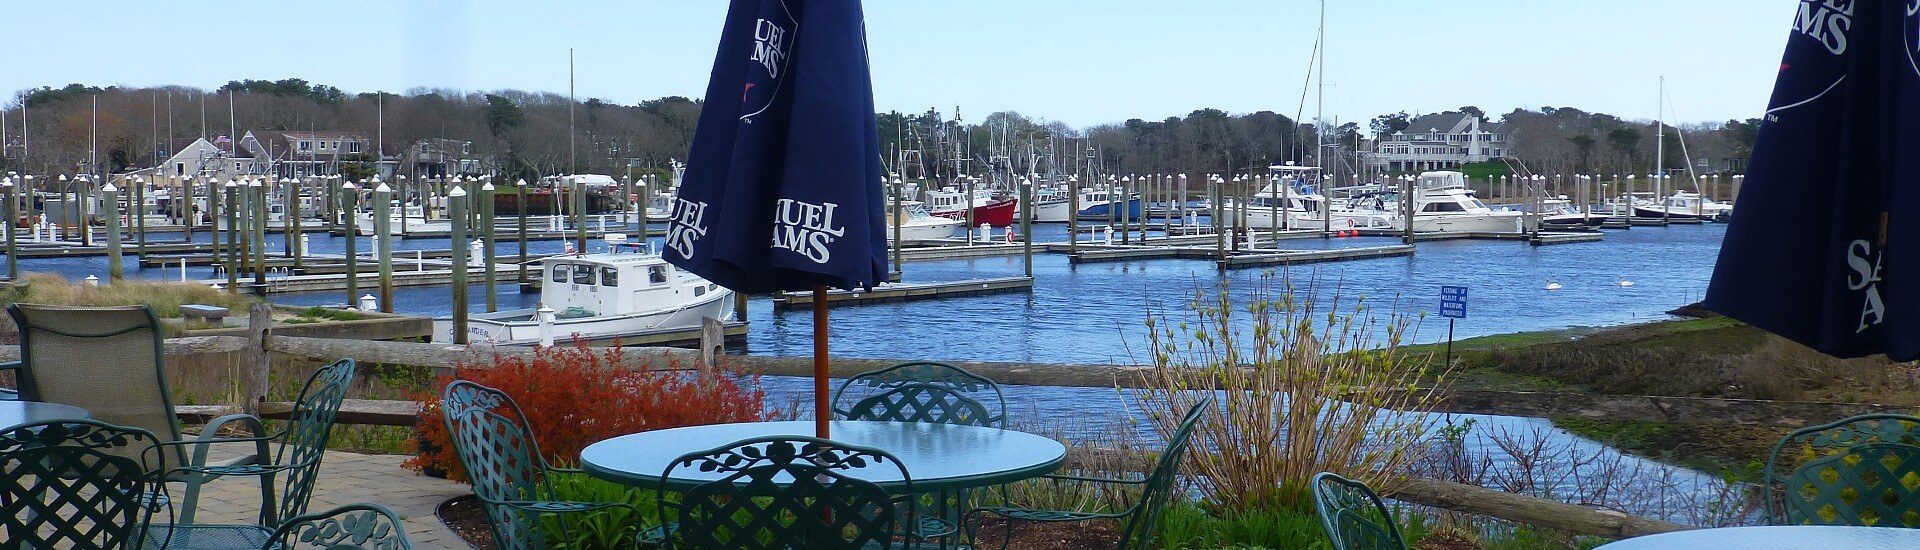 Outdoor patio of a restaurant with several patio tables next to a large marina with boats